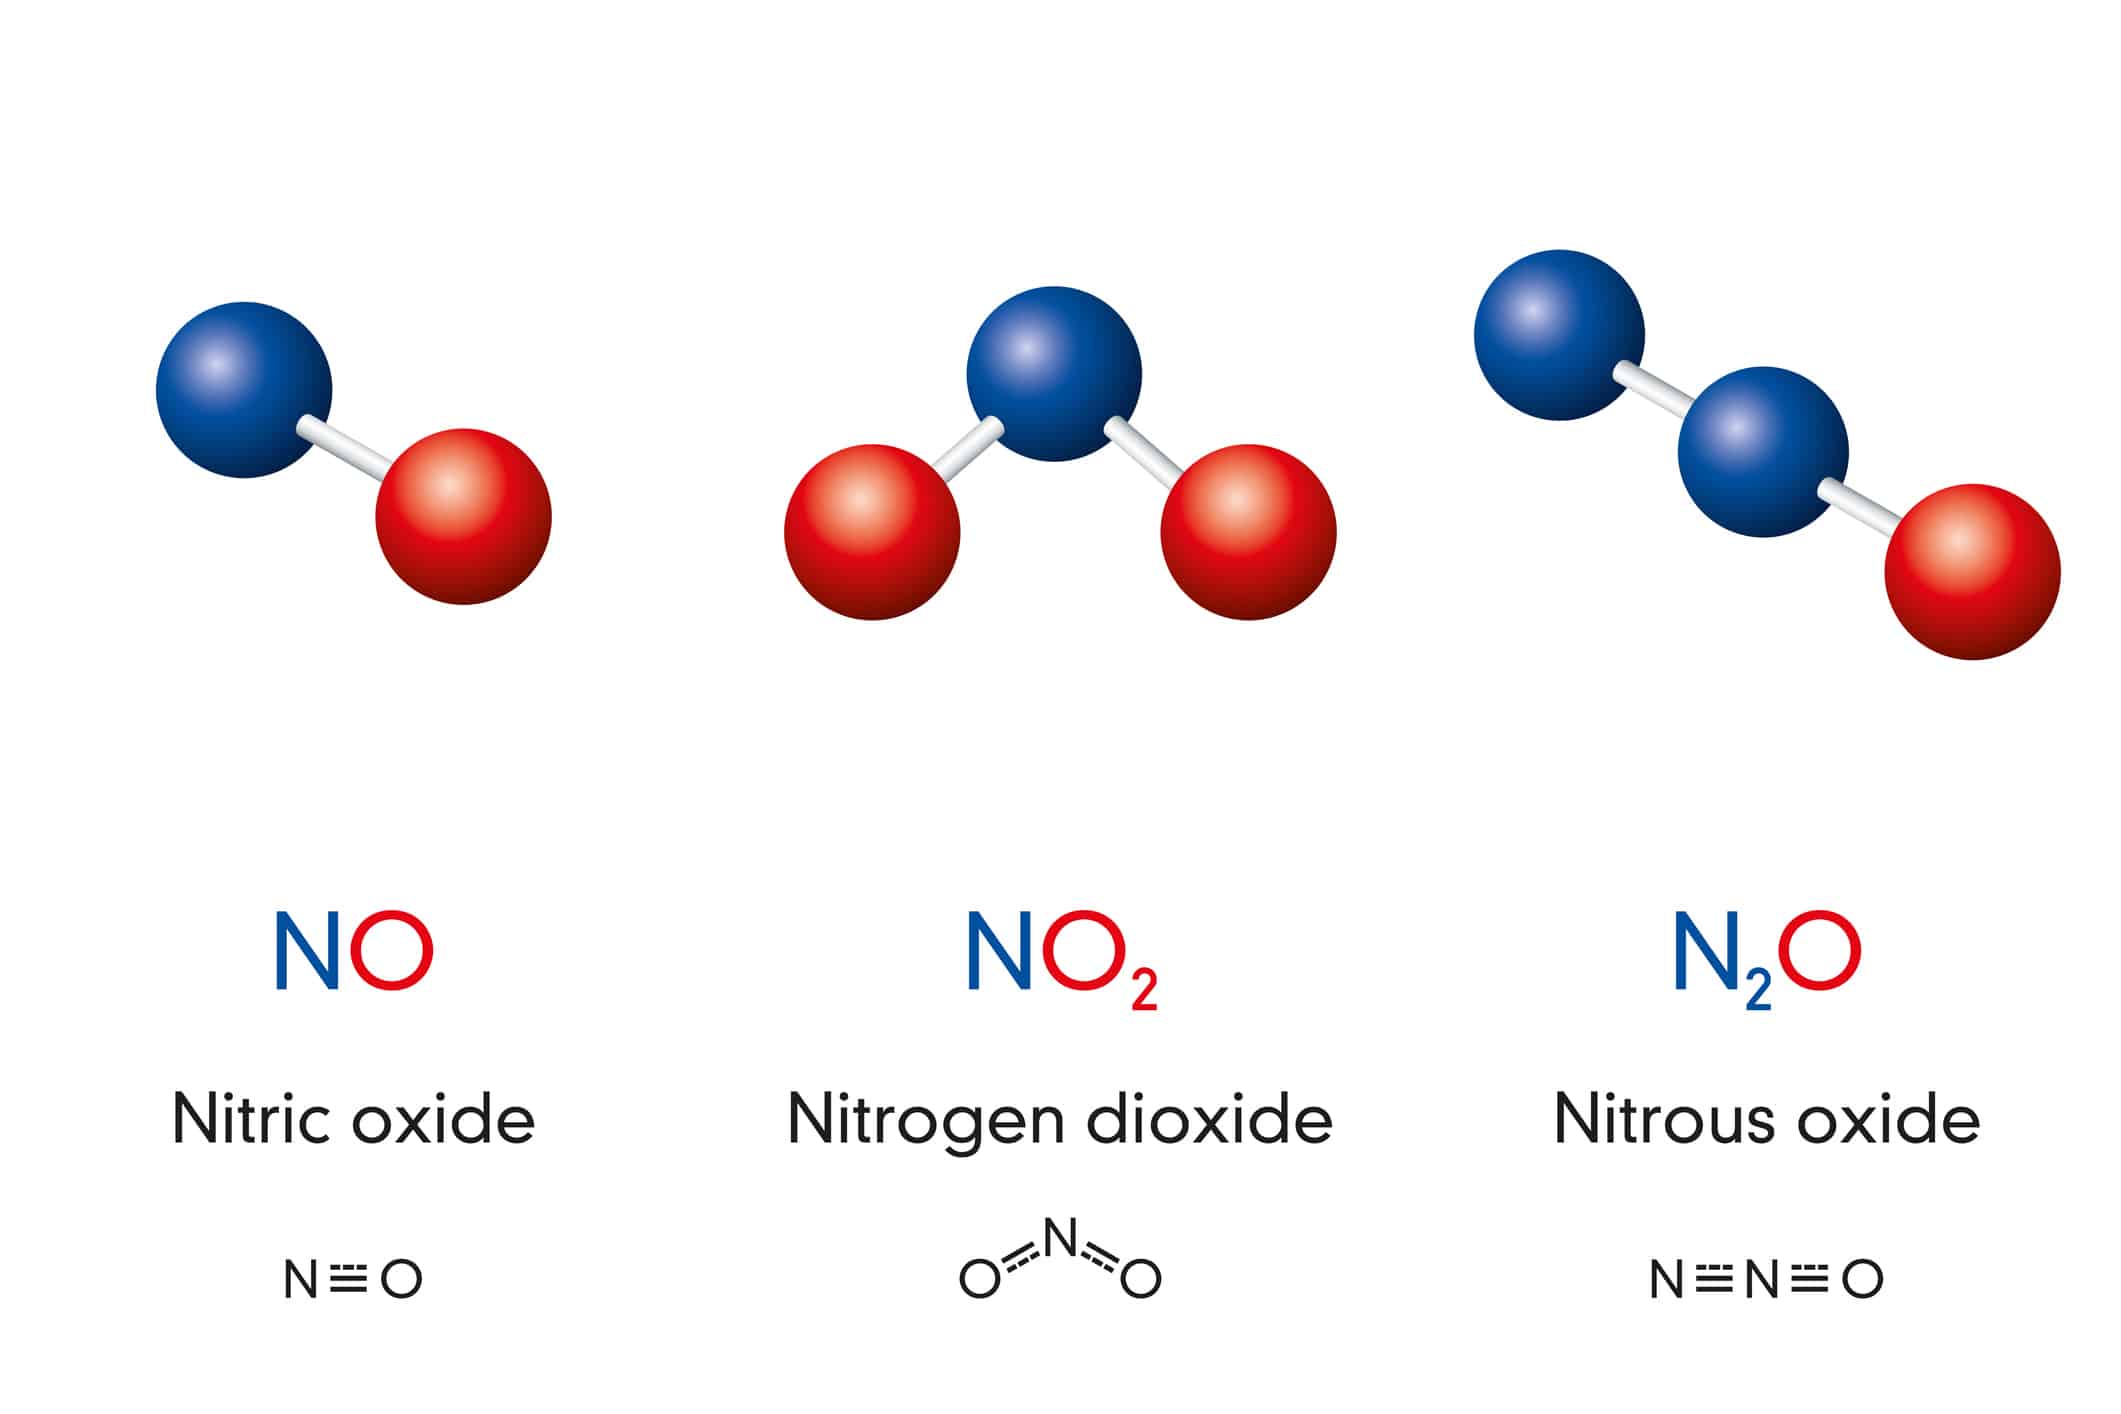 Nitric oxide, Nitrogen dioxide and Nitrous oxide, laughing gas